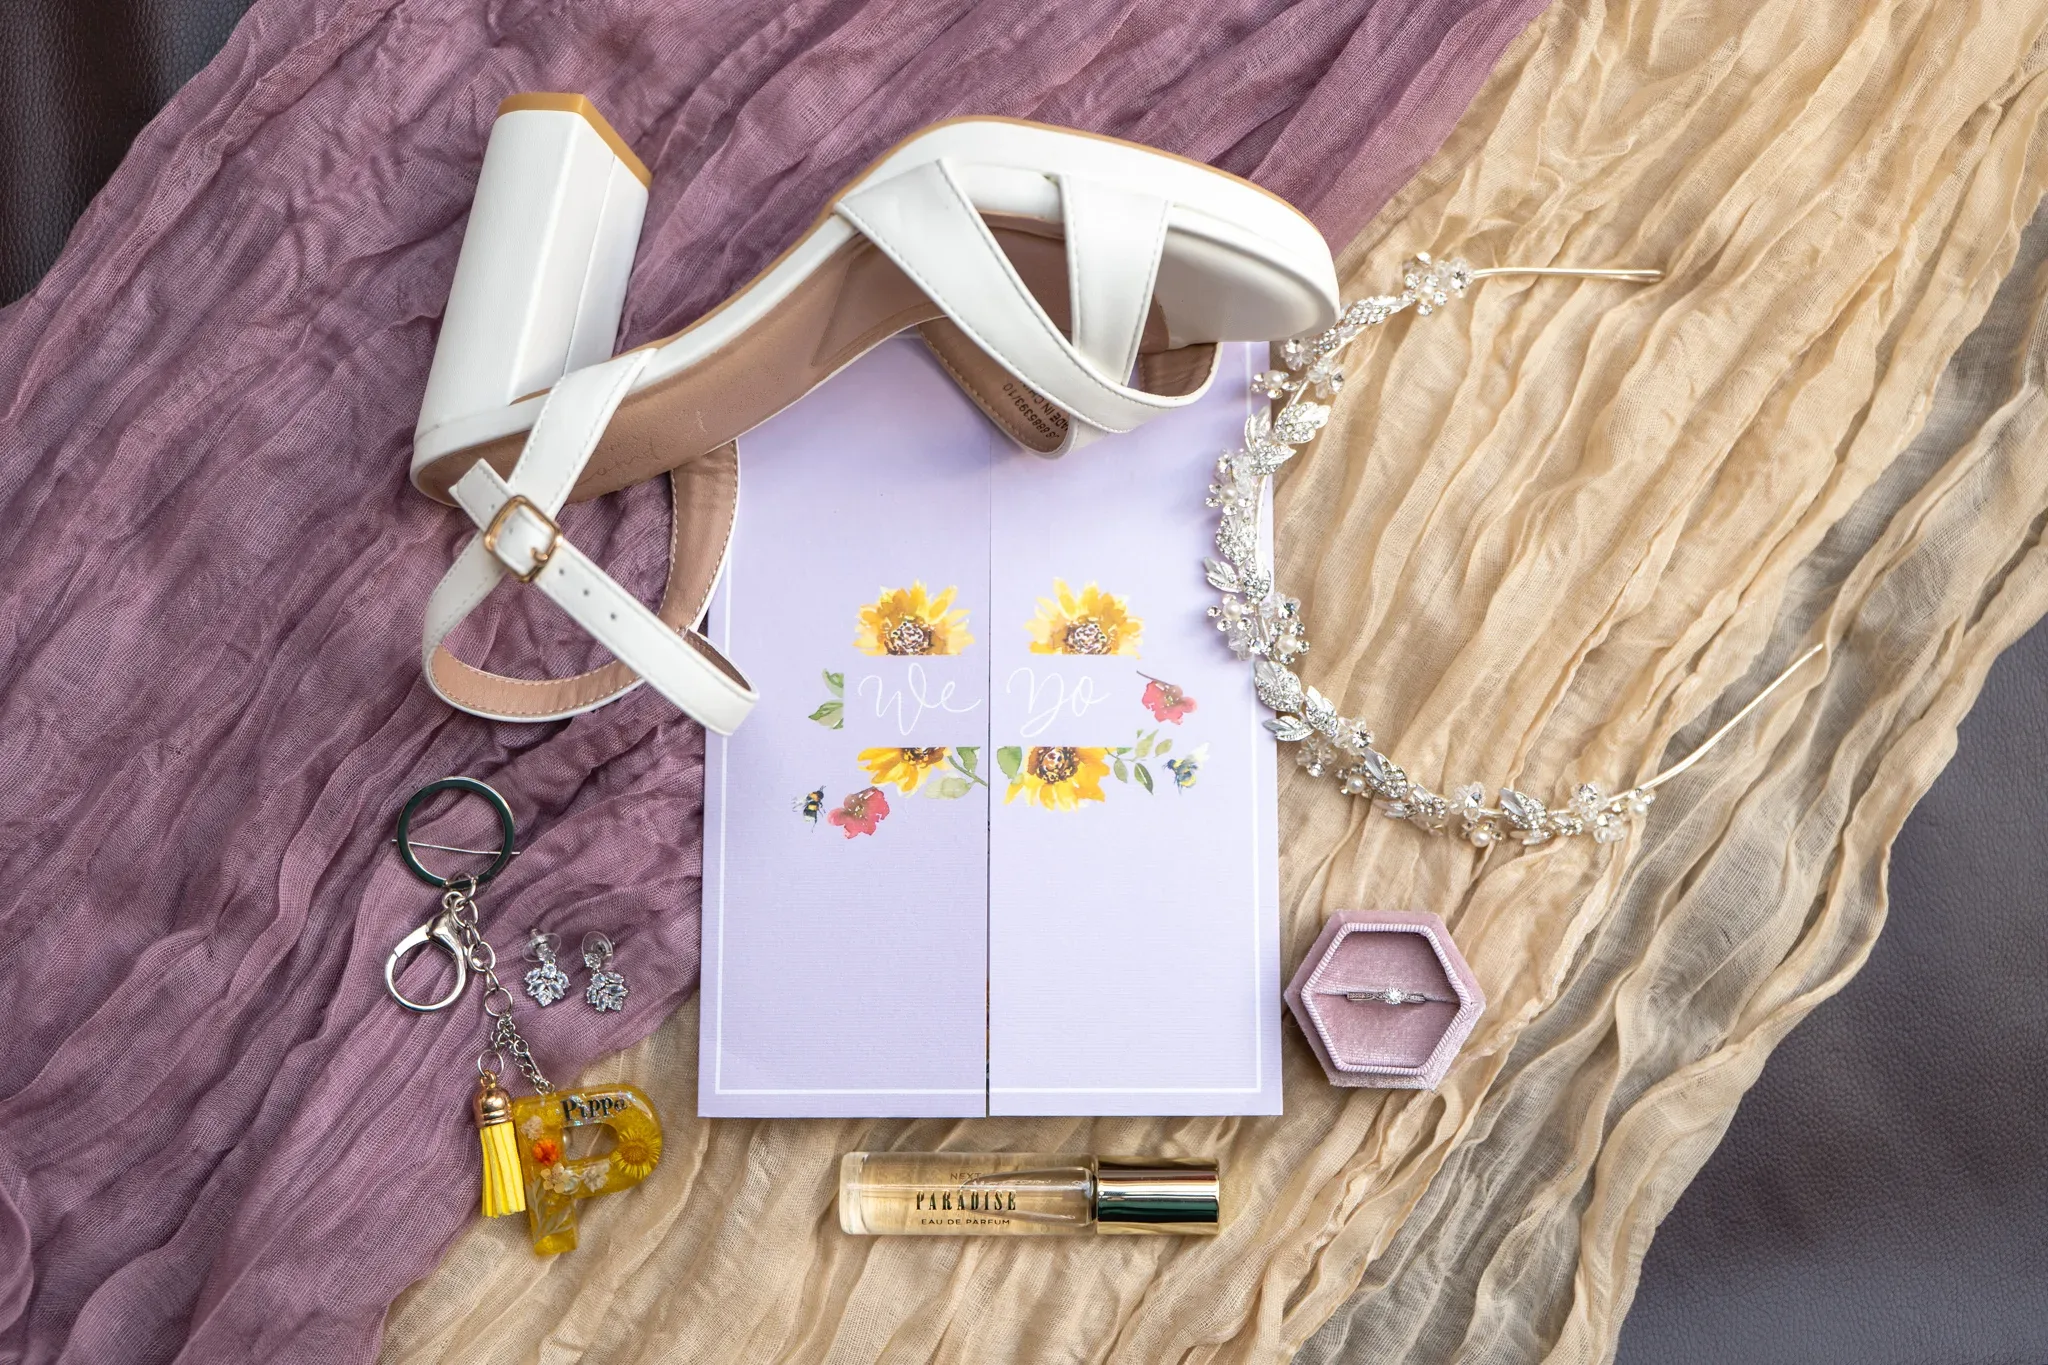 Elegant bridal accessories arranged on a textured surface, featuring white high-heeled shoes, a floral wedding invitation, a crystal necklace, a keychain, and a touch of makeup, all capturing the essence of wedding day preparations.